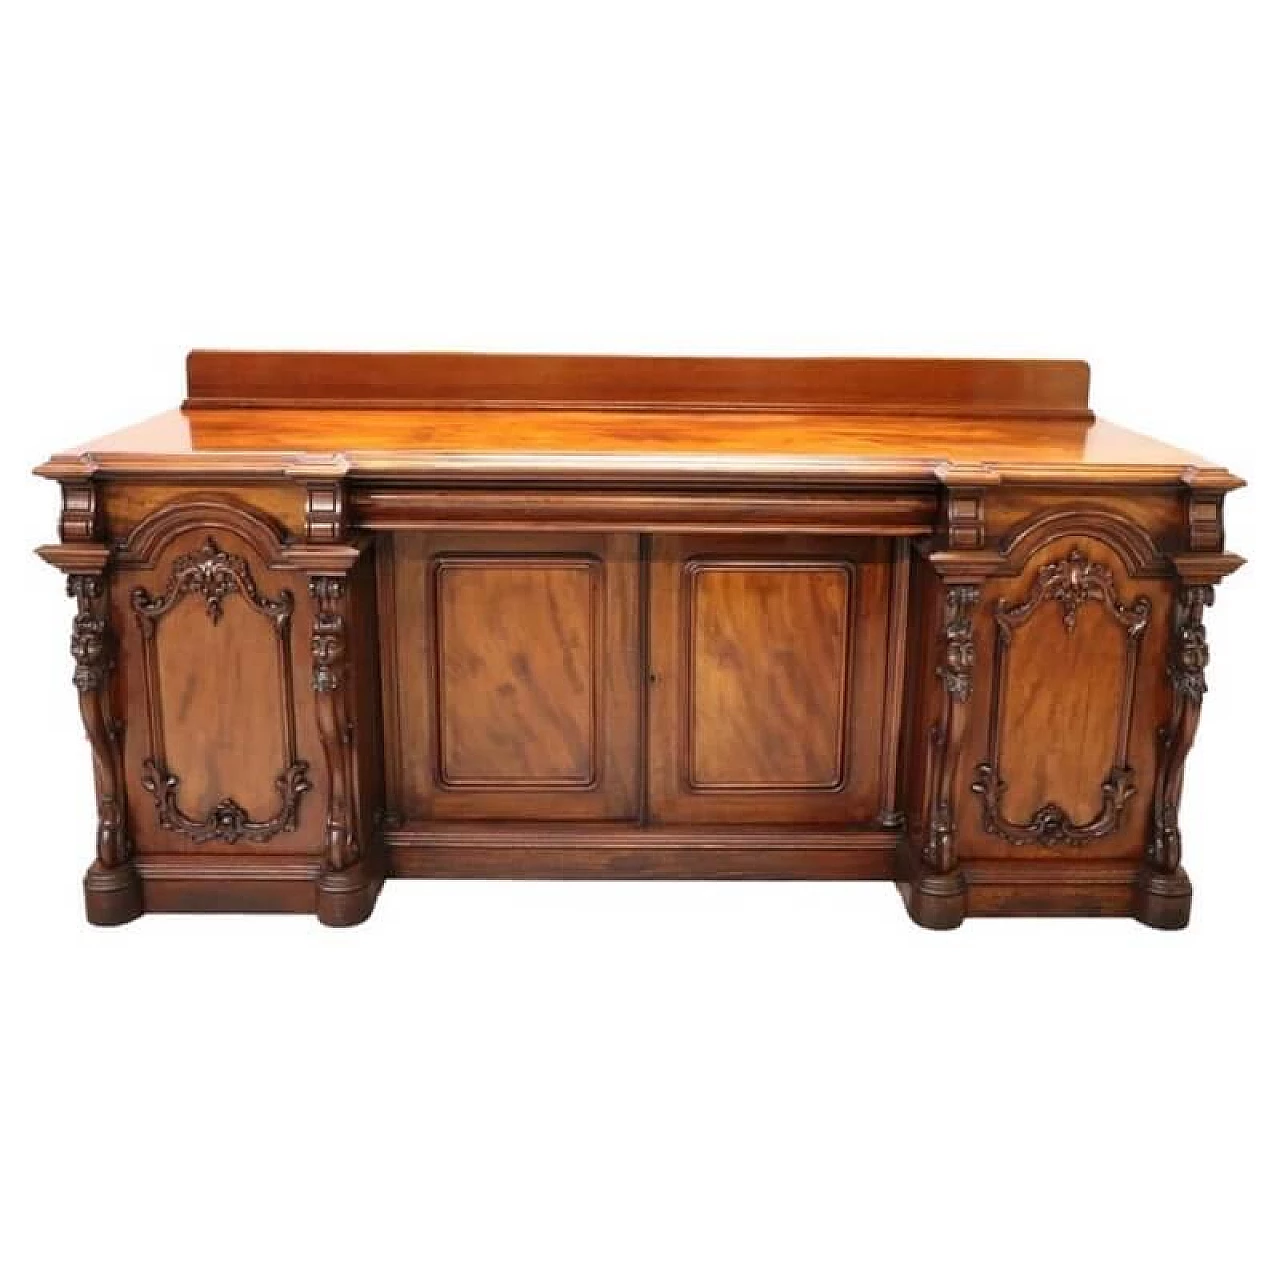 Mahogany sideboard with carvings, early 20th century 1